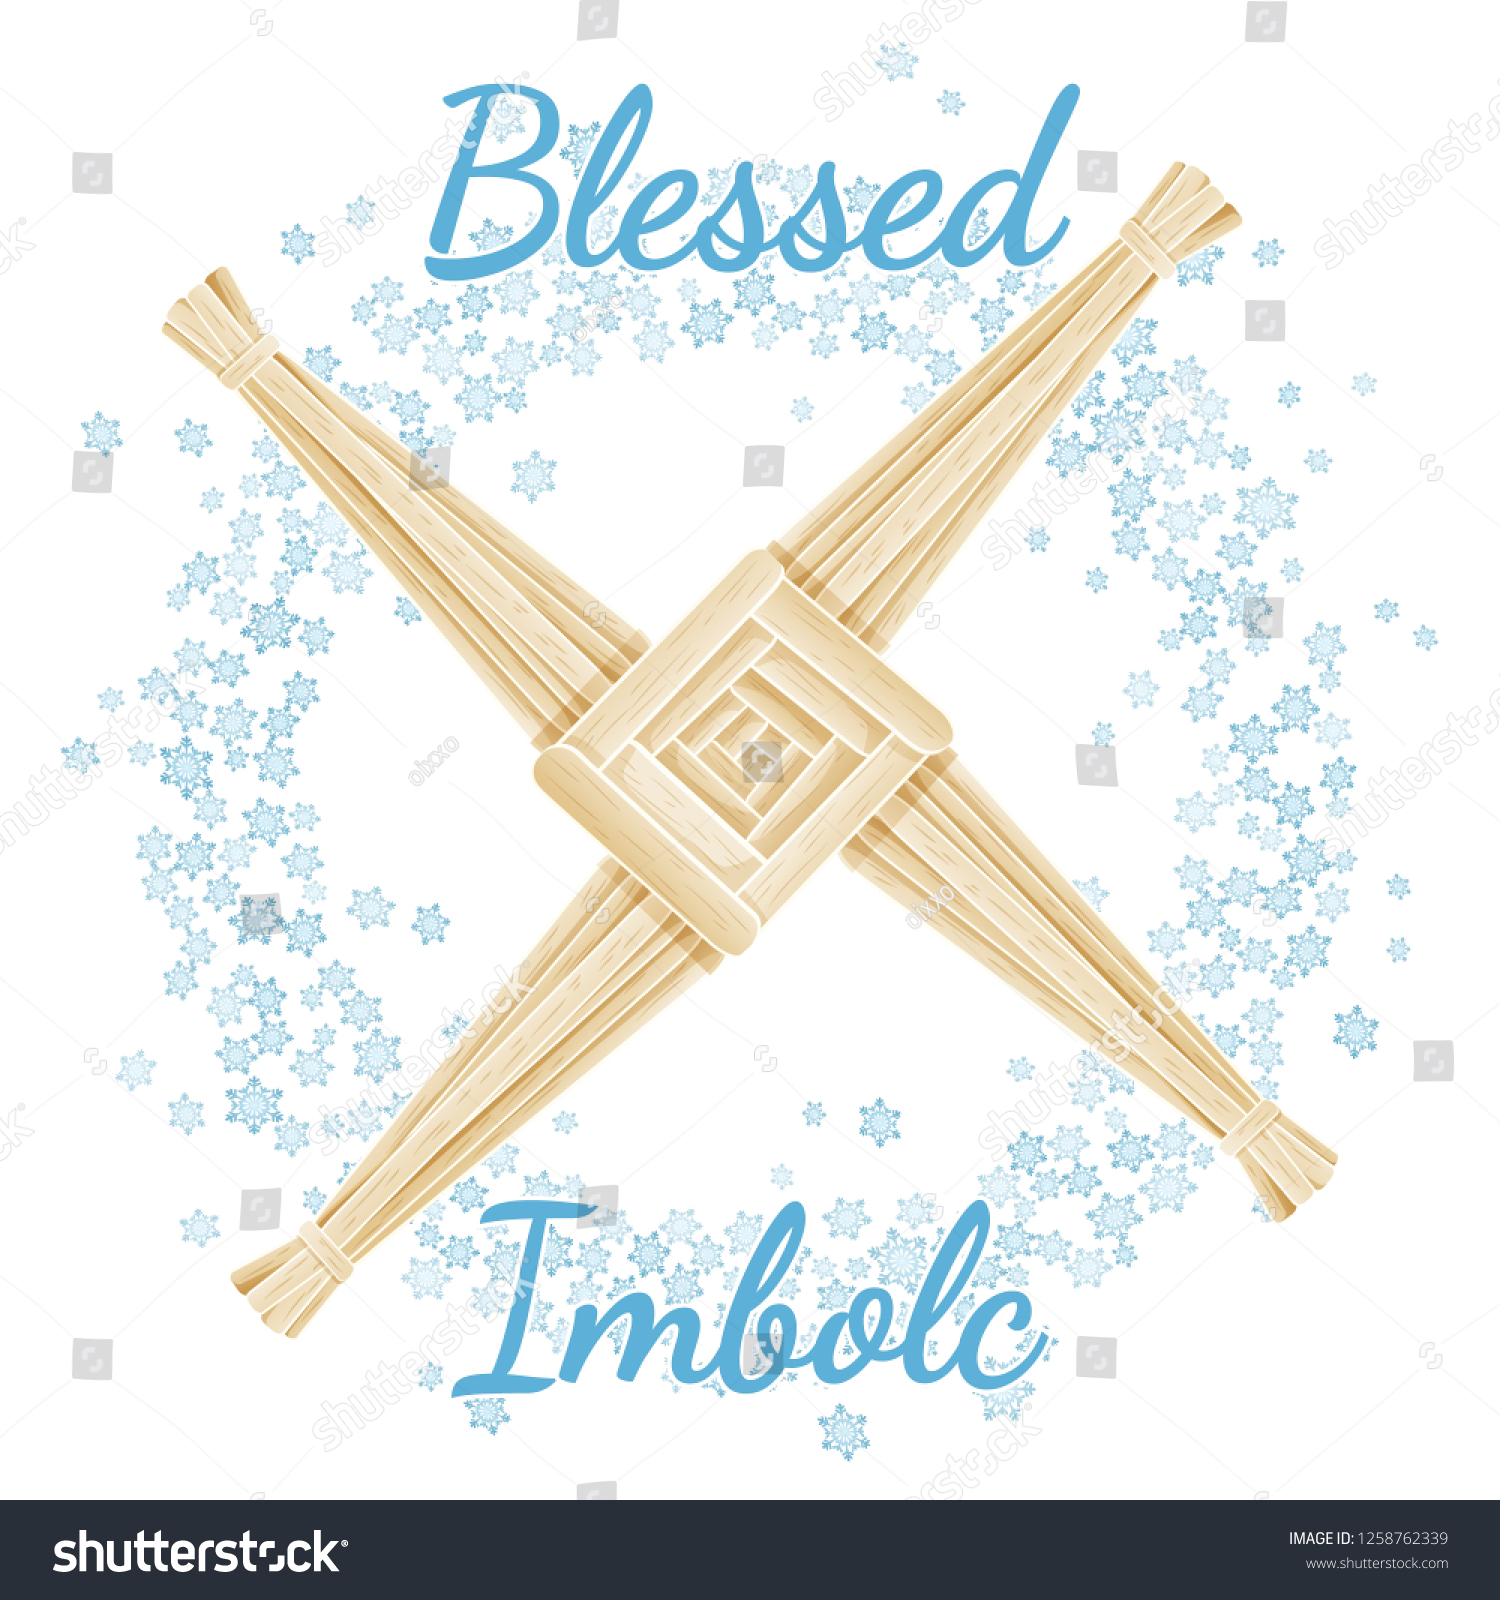 SVG of Blessed Imbolc beginning of spring pagan holiday text in a wreath of snowflakes with Brigid's Cross. Vector postcard svg